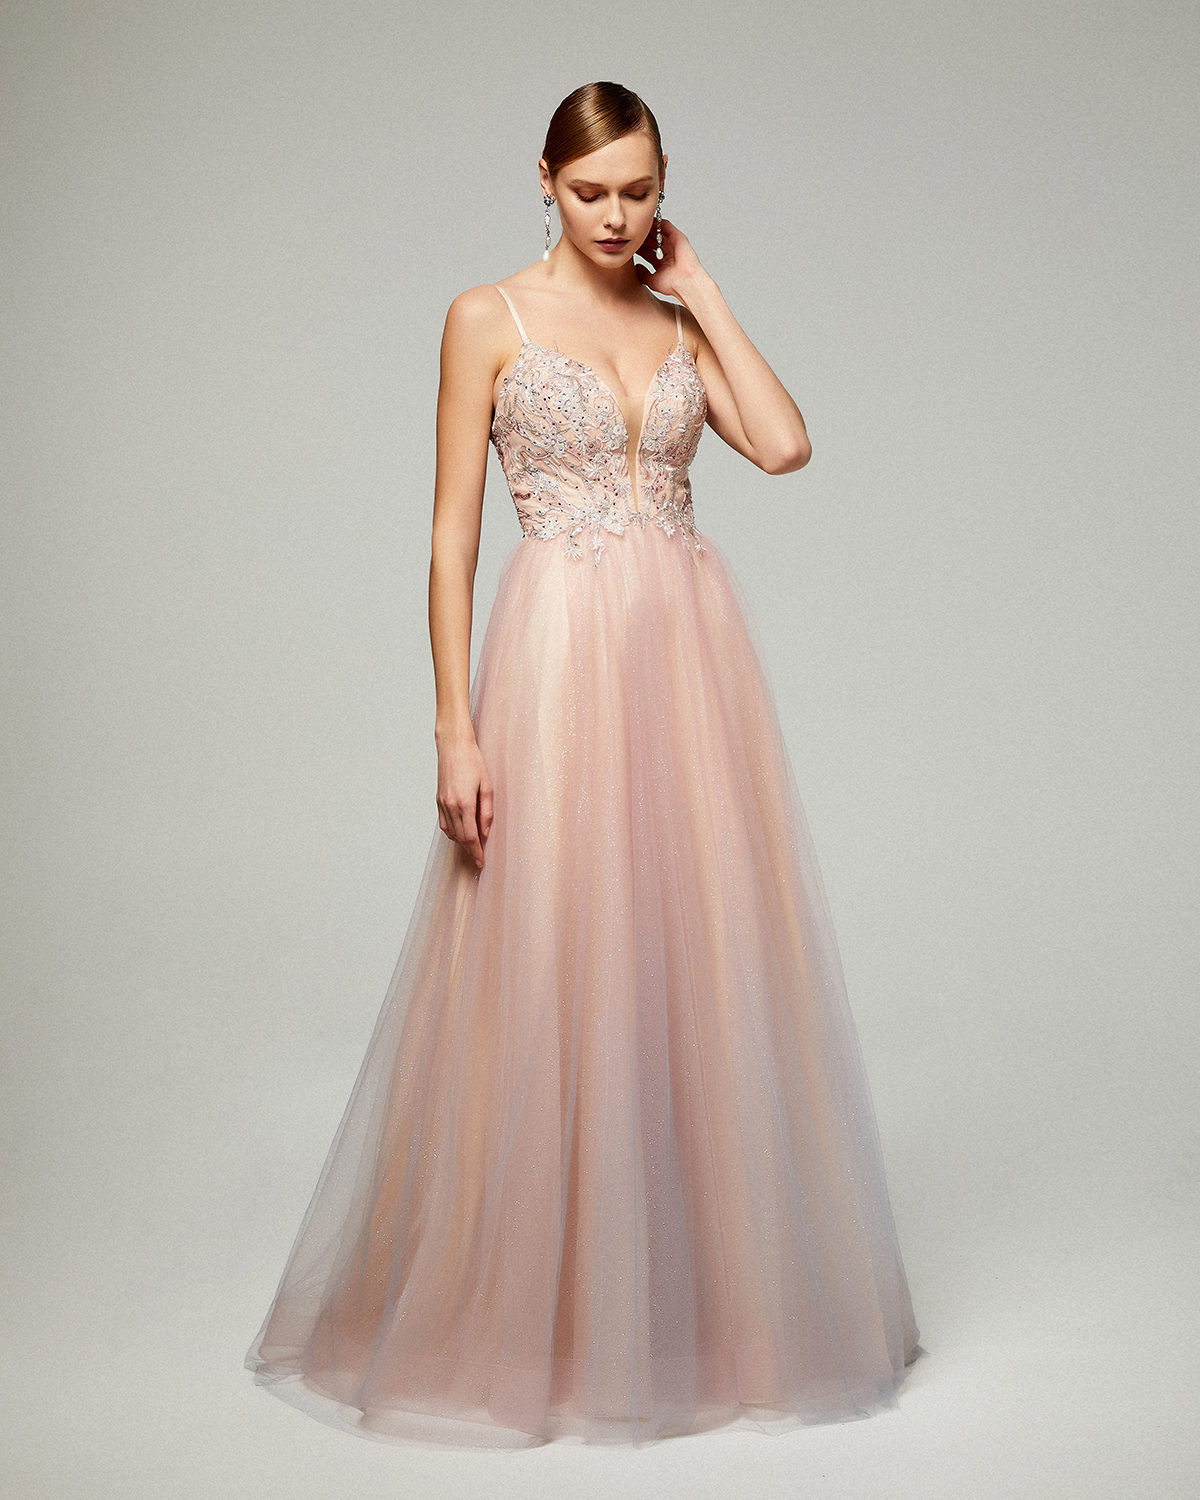 Evening Dresses / Long evening dress with shining tulle fabric,  top with lace and beading